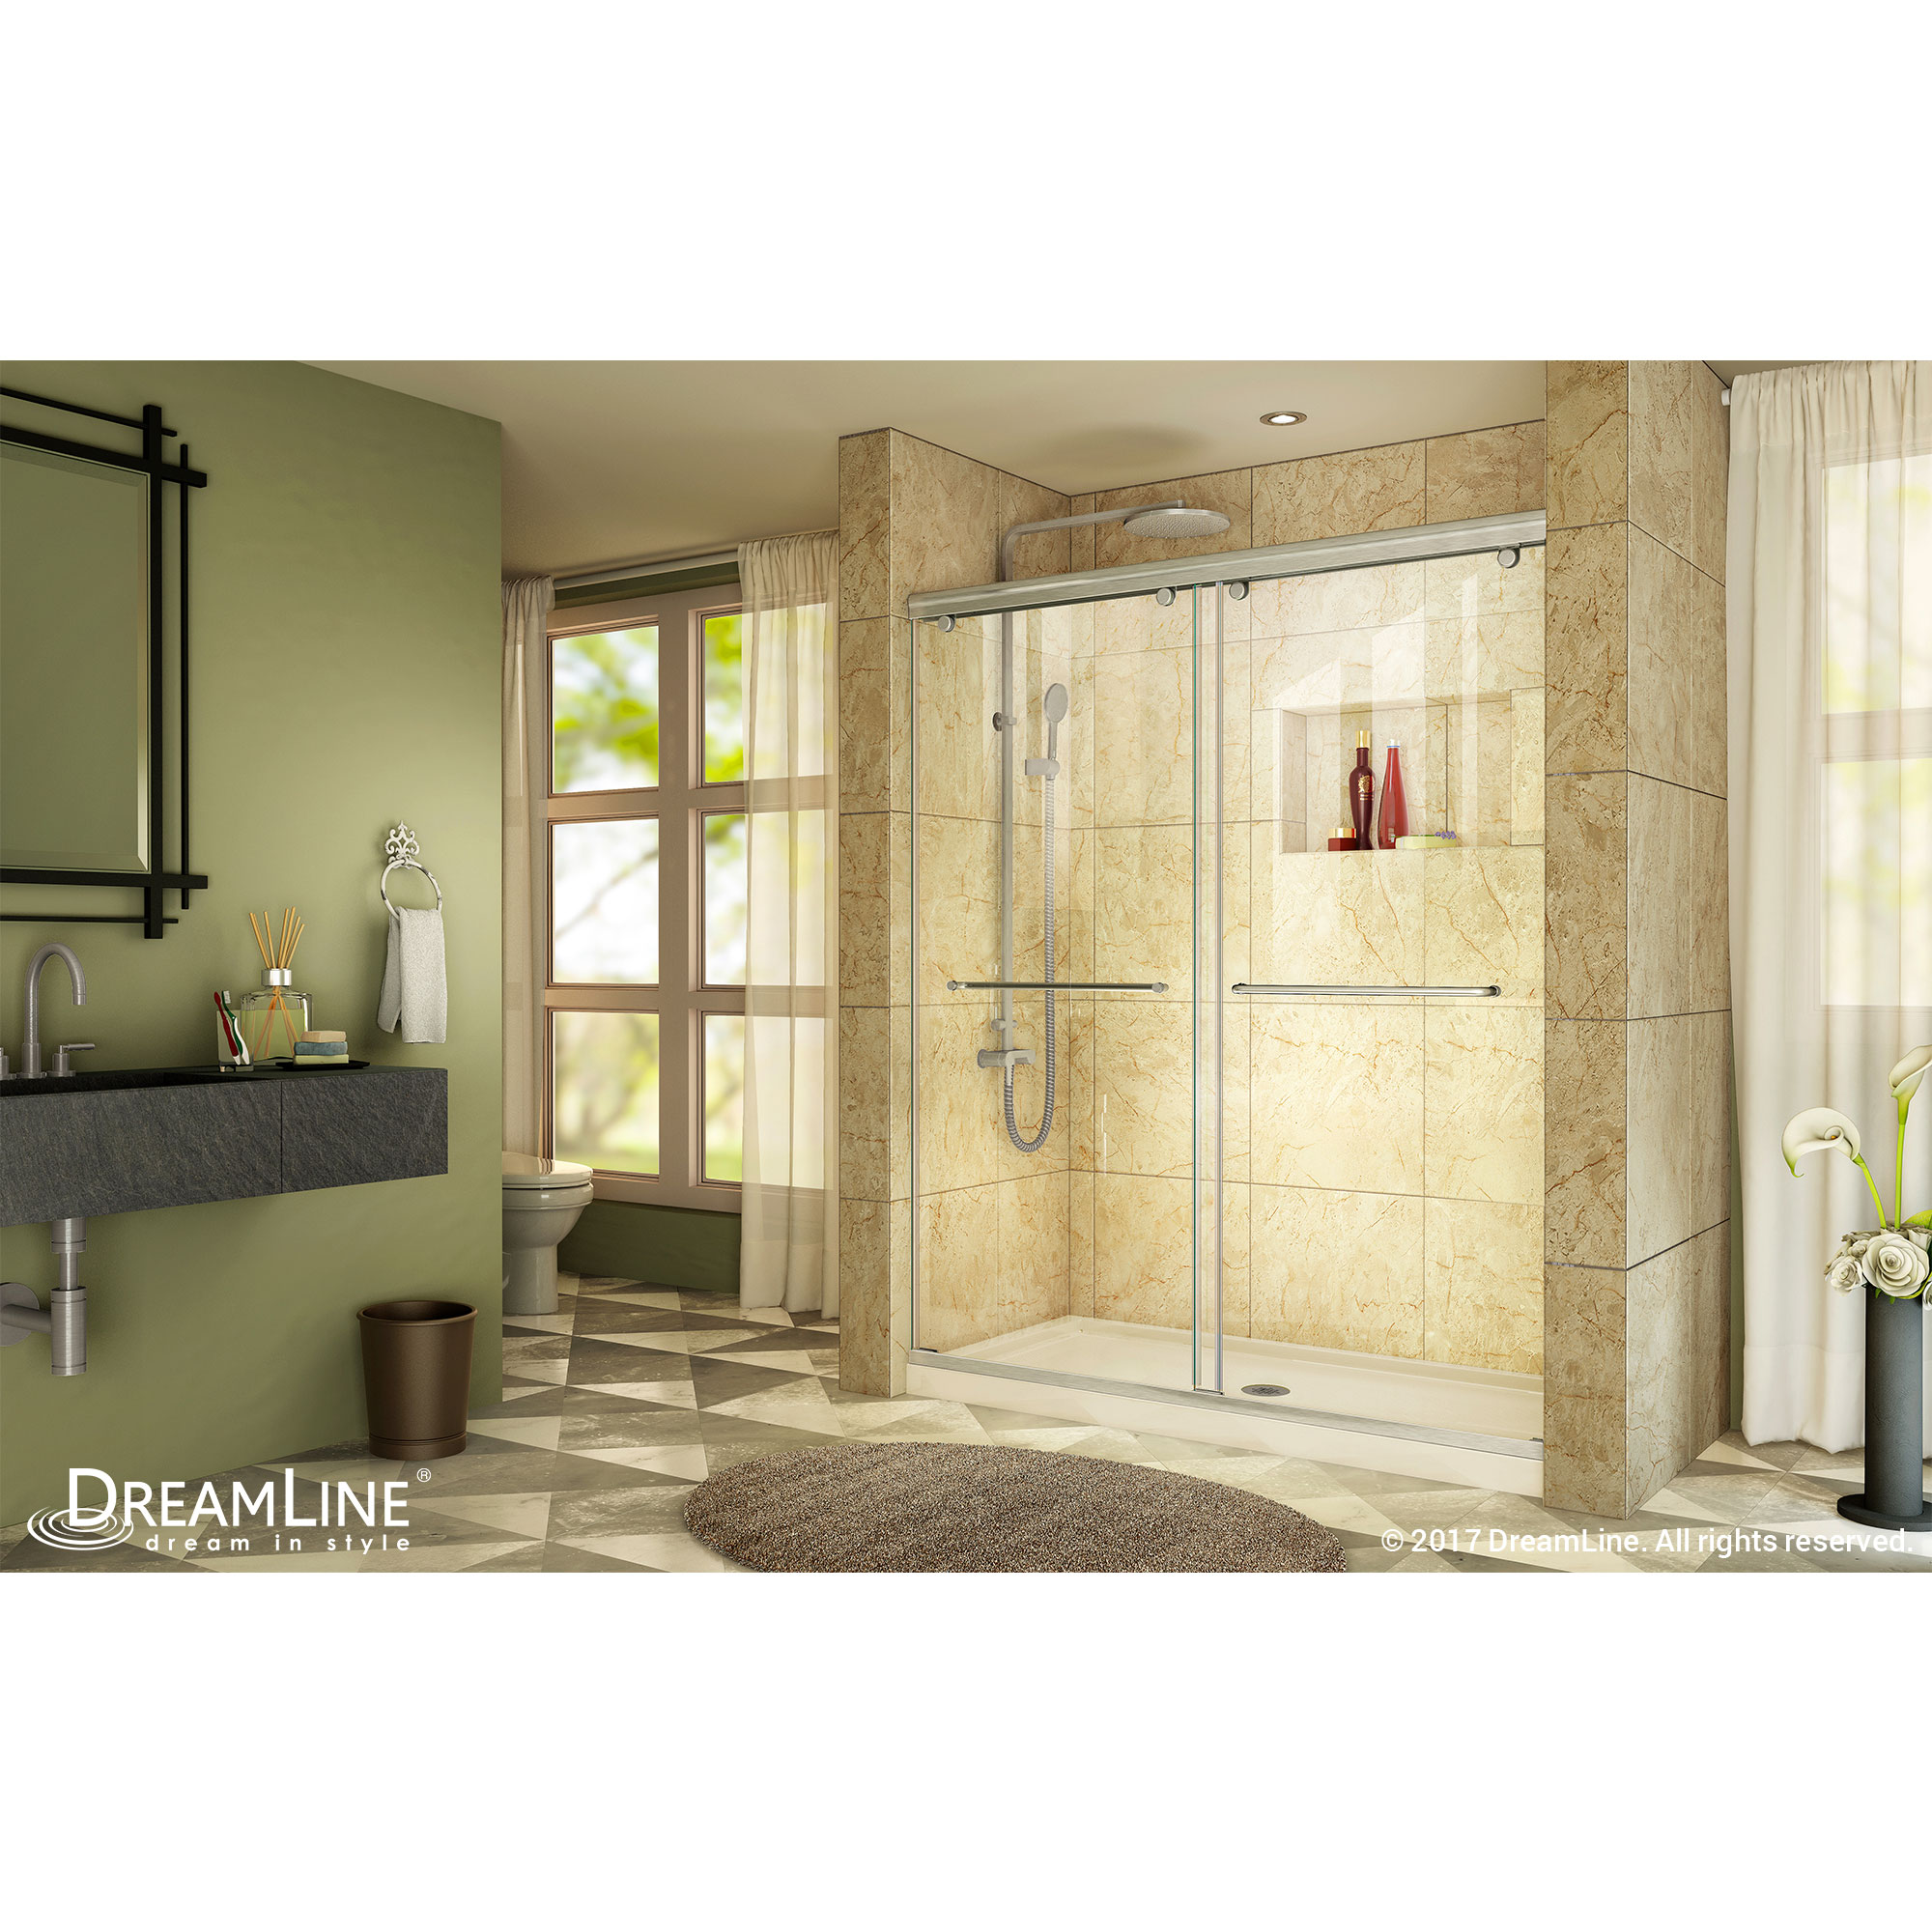 DreamLine Charisma 30 in. D x 60 in. W x 78 3/4 in. H Bypass Shower Door in Brushed Nickel with Center Drain Biscuit Base Kit